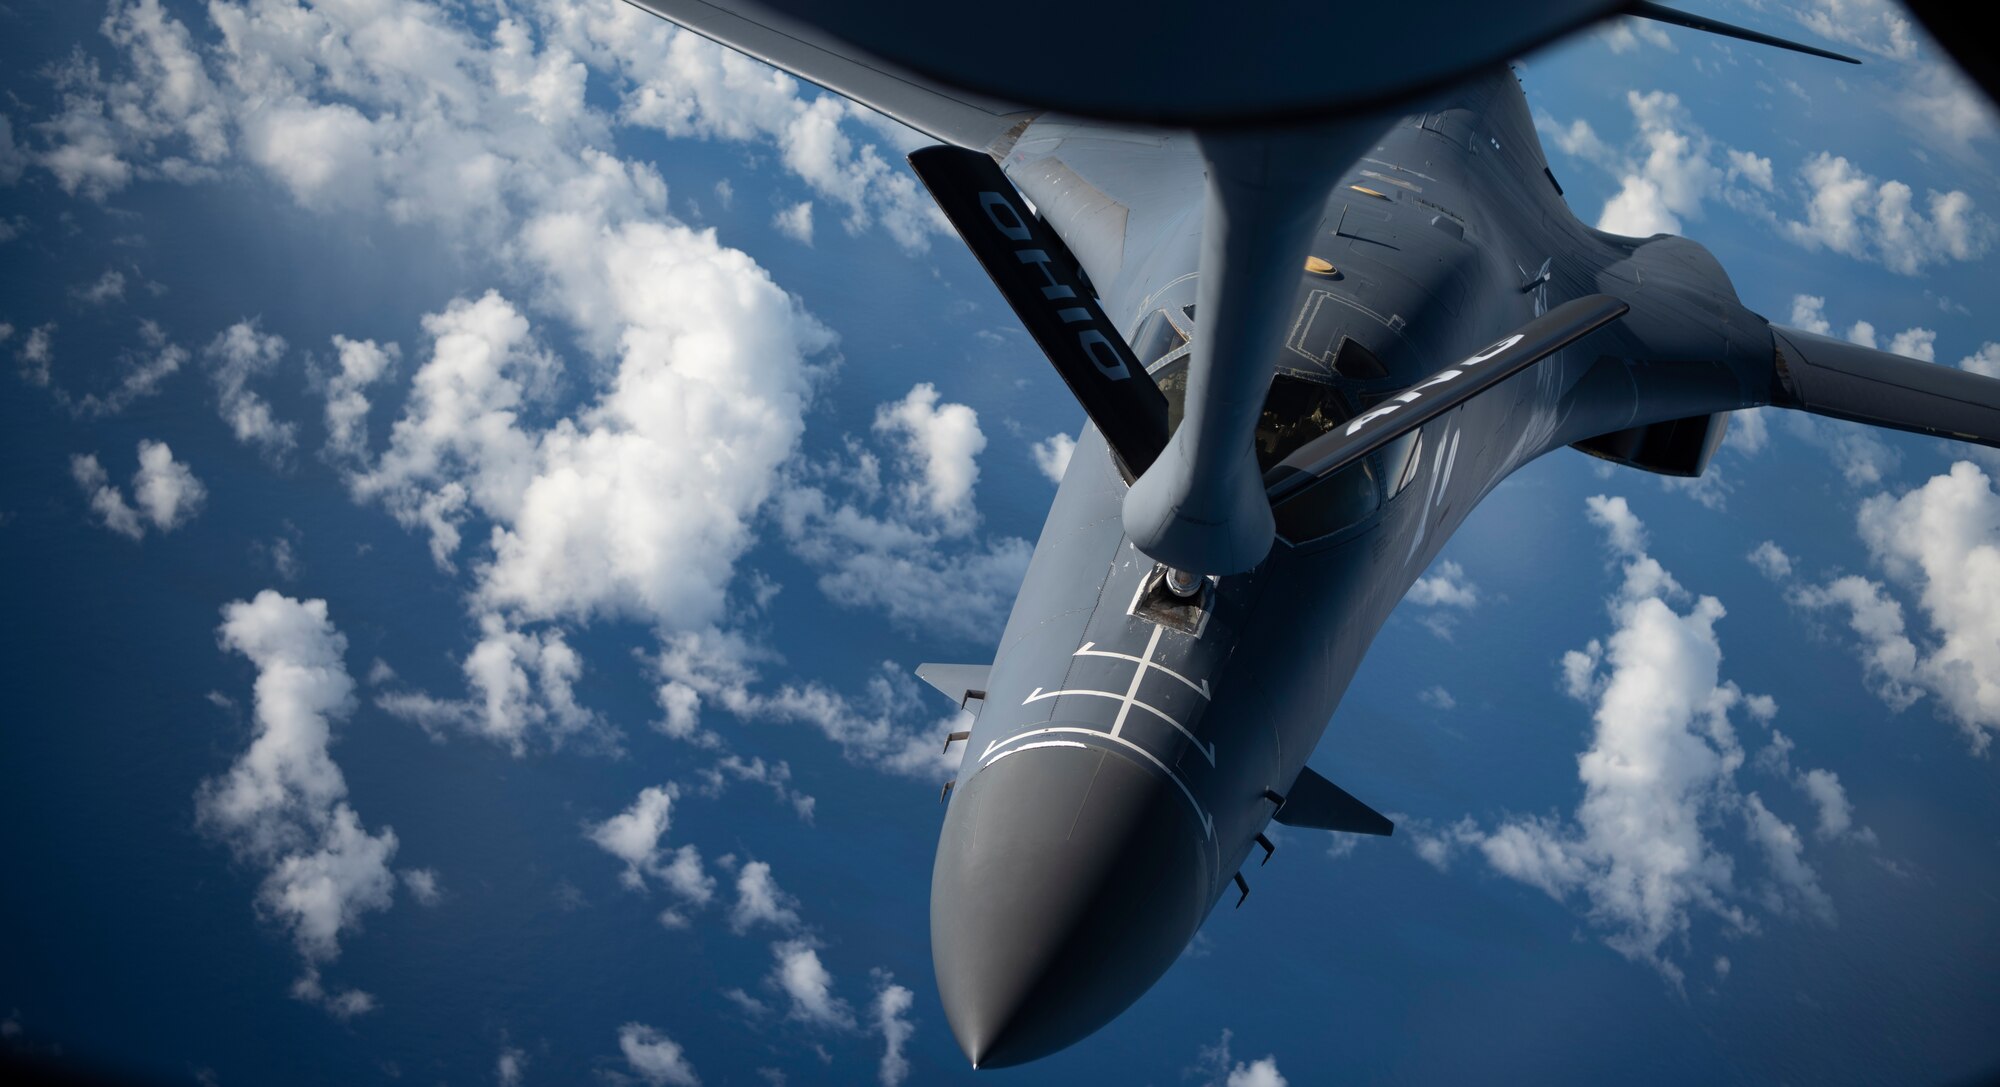 A 9th Expeditionary Bomb Squadron B-1B Lancer is refueled by an Ohio Air National Guard KC-135 Stratotanker from the 166th Aerial Refueling Squadron, May 12, 2020, during a training mission in the vicinity of Japan where they integrated with Japan Air Self Defense Force assets. The 9th EBS is deployed to Andersen Air Force Base, Guam, as part of a Bomber Task Force and is supporting Pacific Air Forces’ strategic deterrence missions and commitment to the security and stability of the Indo-Pacific region. (U.S. Air Force photo by Senior Airman River Bruce)